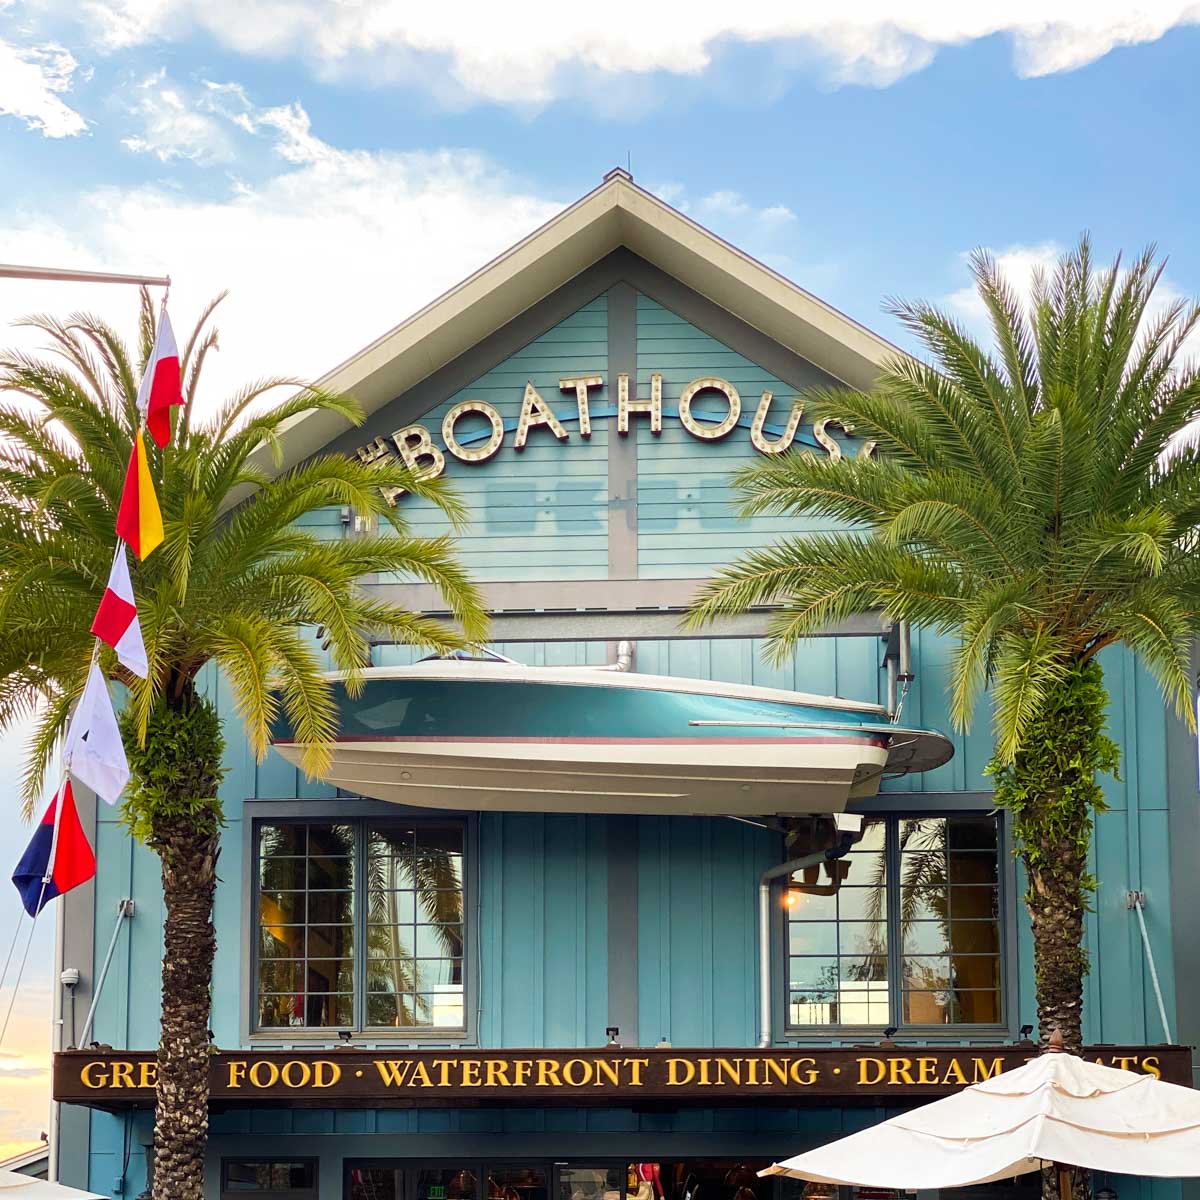 The outside of the Boathouse restaurant in Disney Springs.